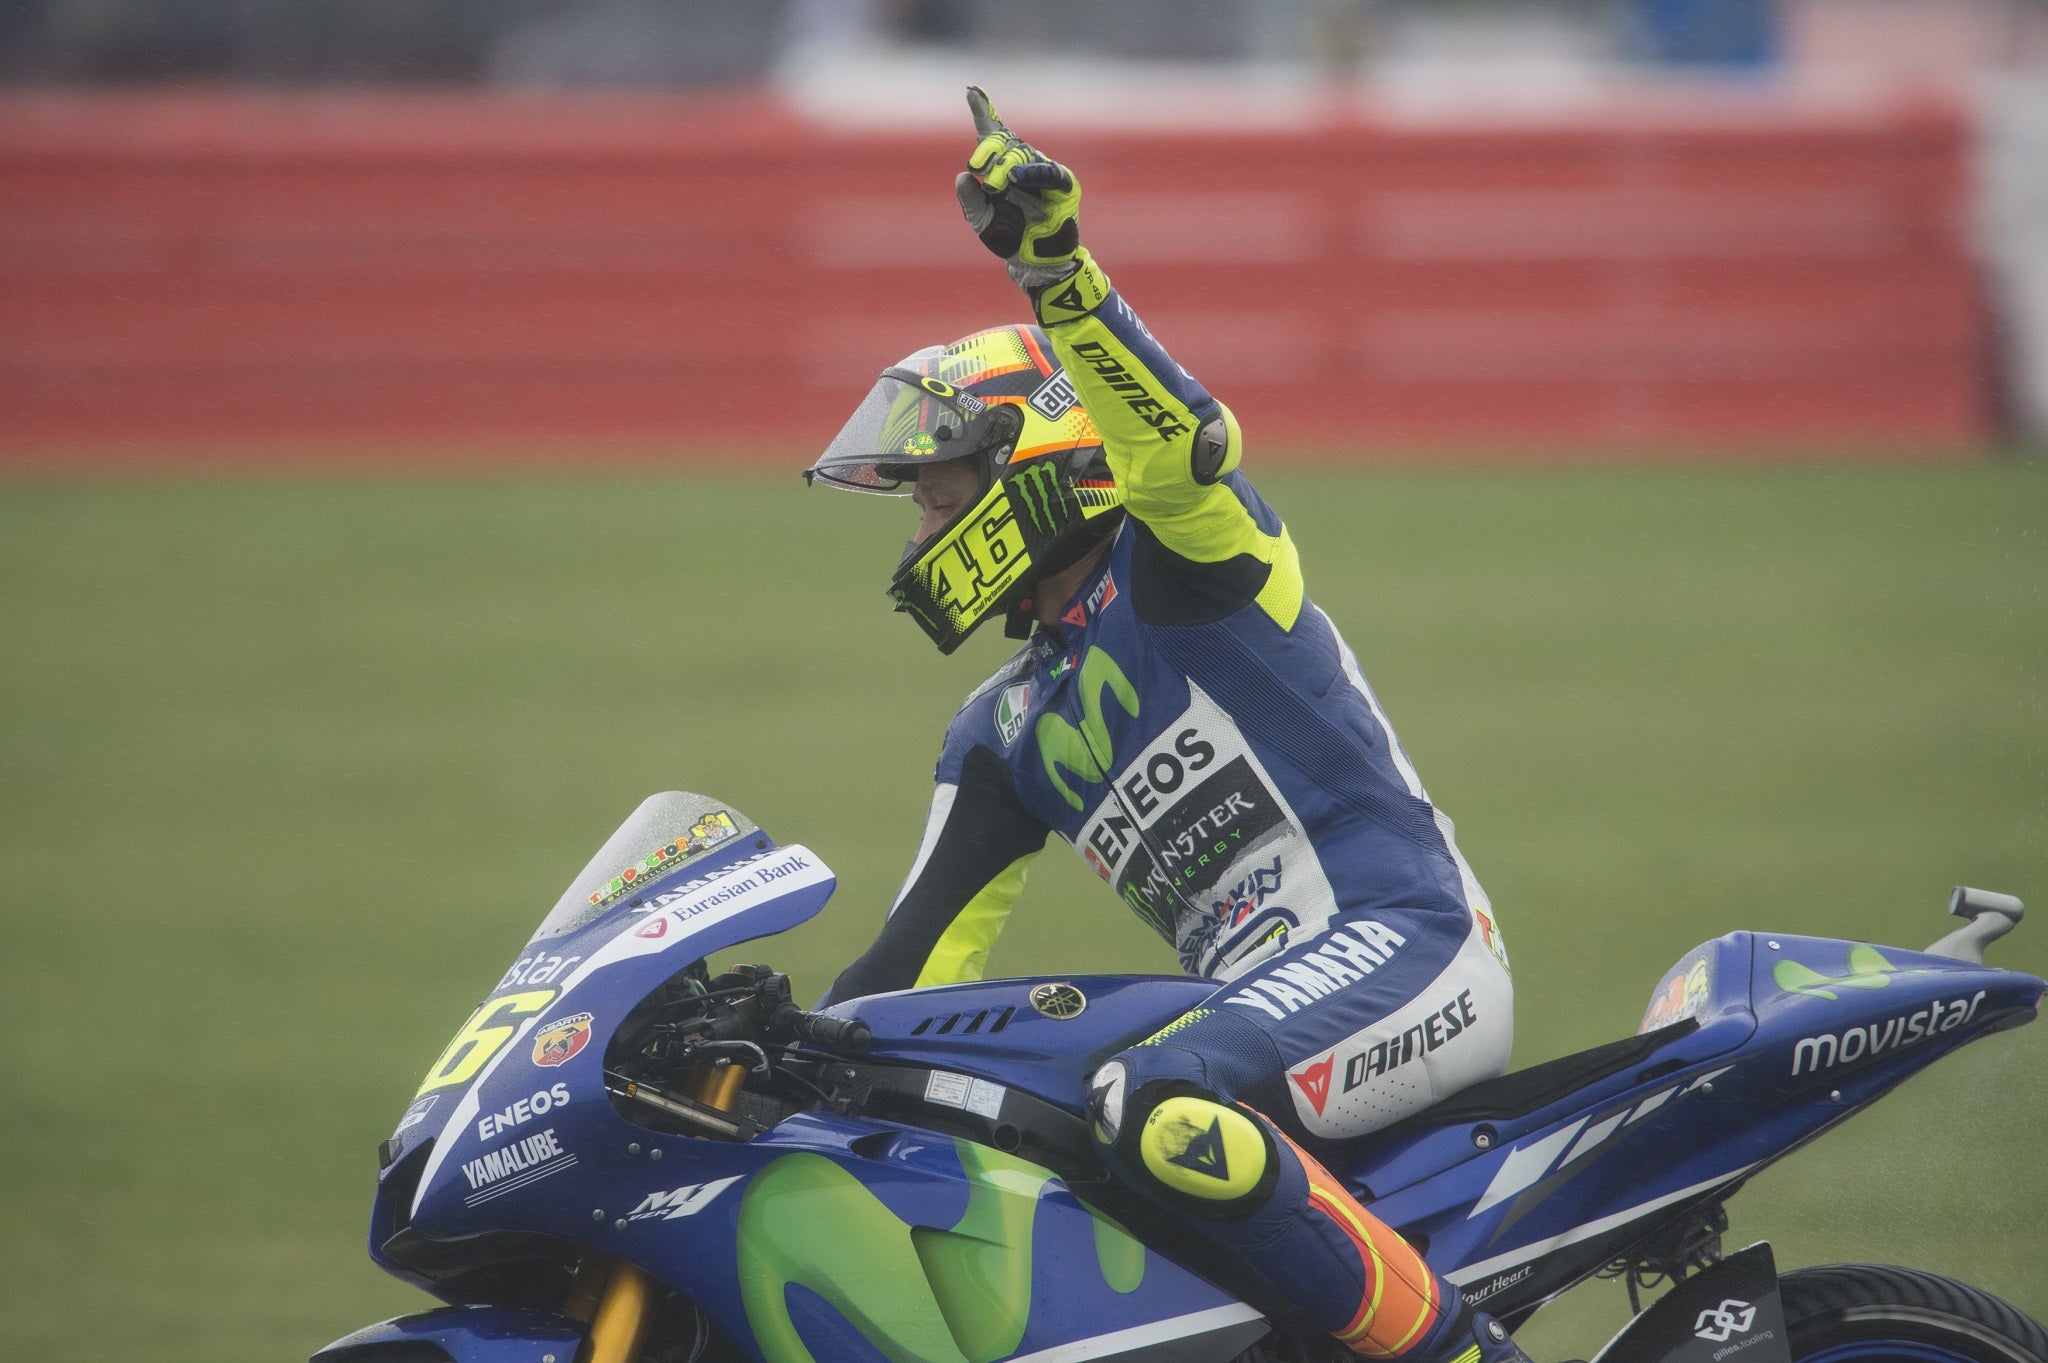 Valentino Rossi salutes the crowd after taking victory in the British Grand Prix